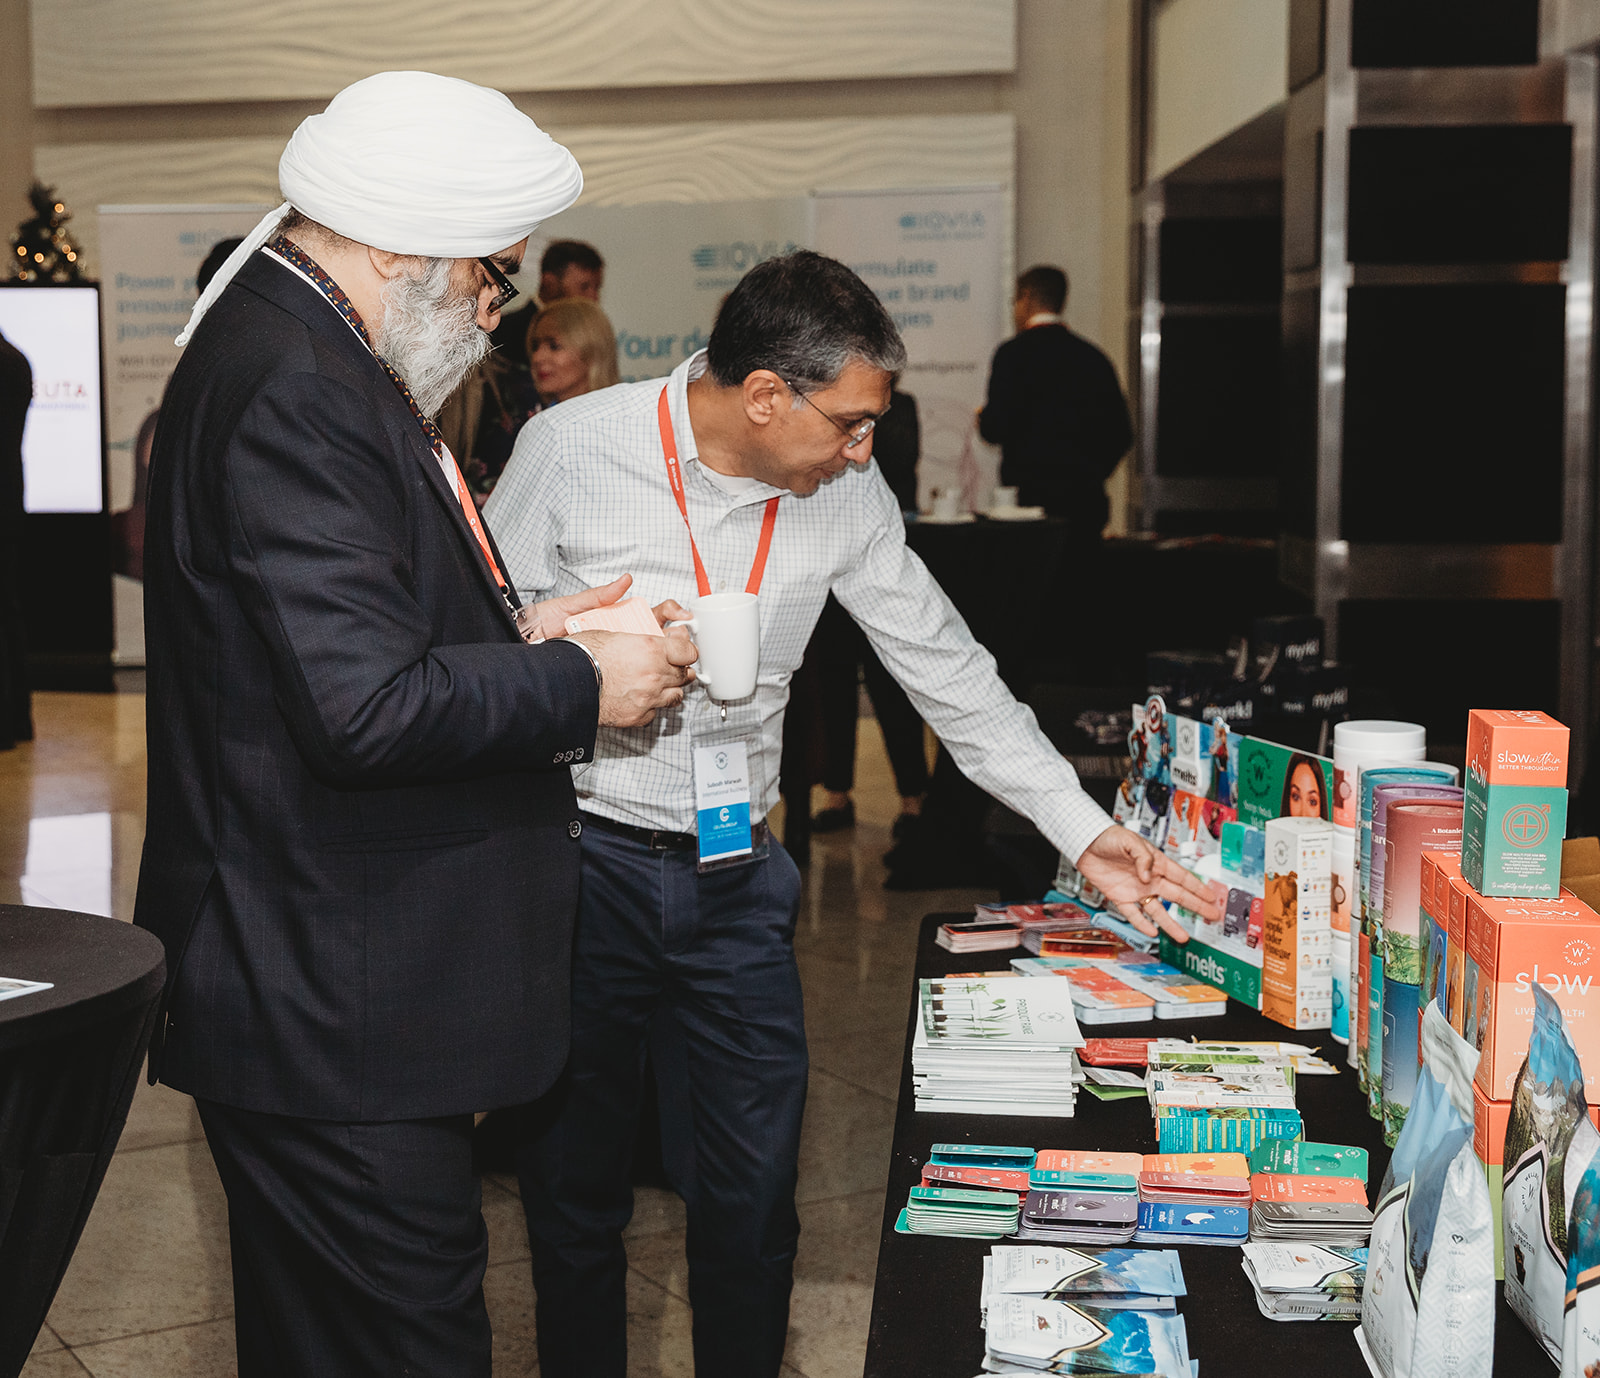 Two people pick up various healthcare product samples from a desk at the Ceuta International conference